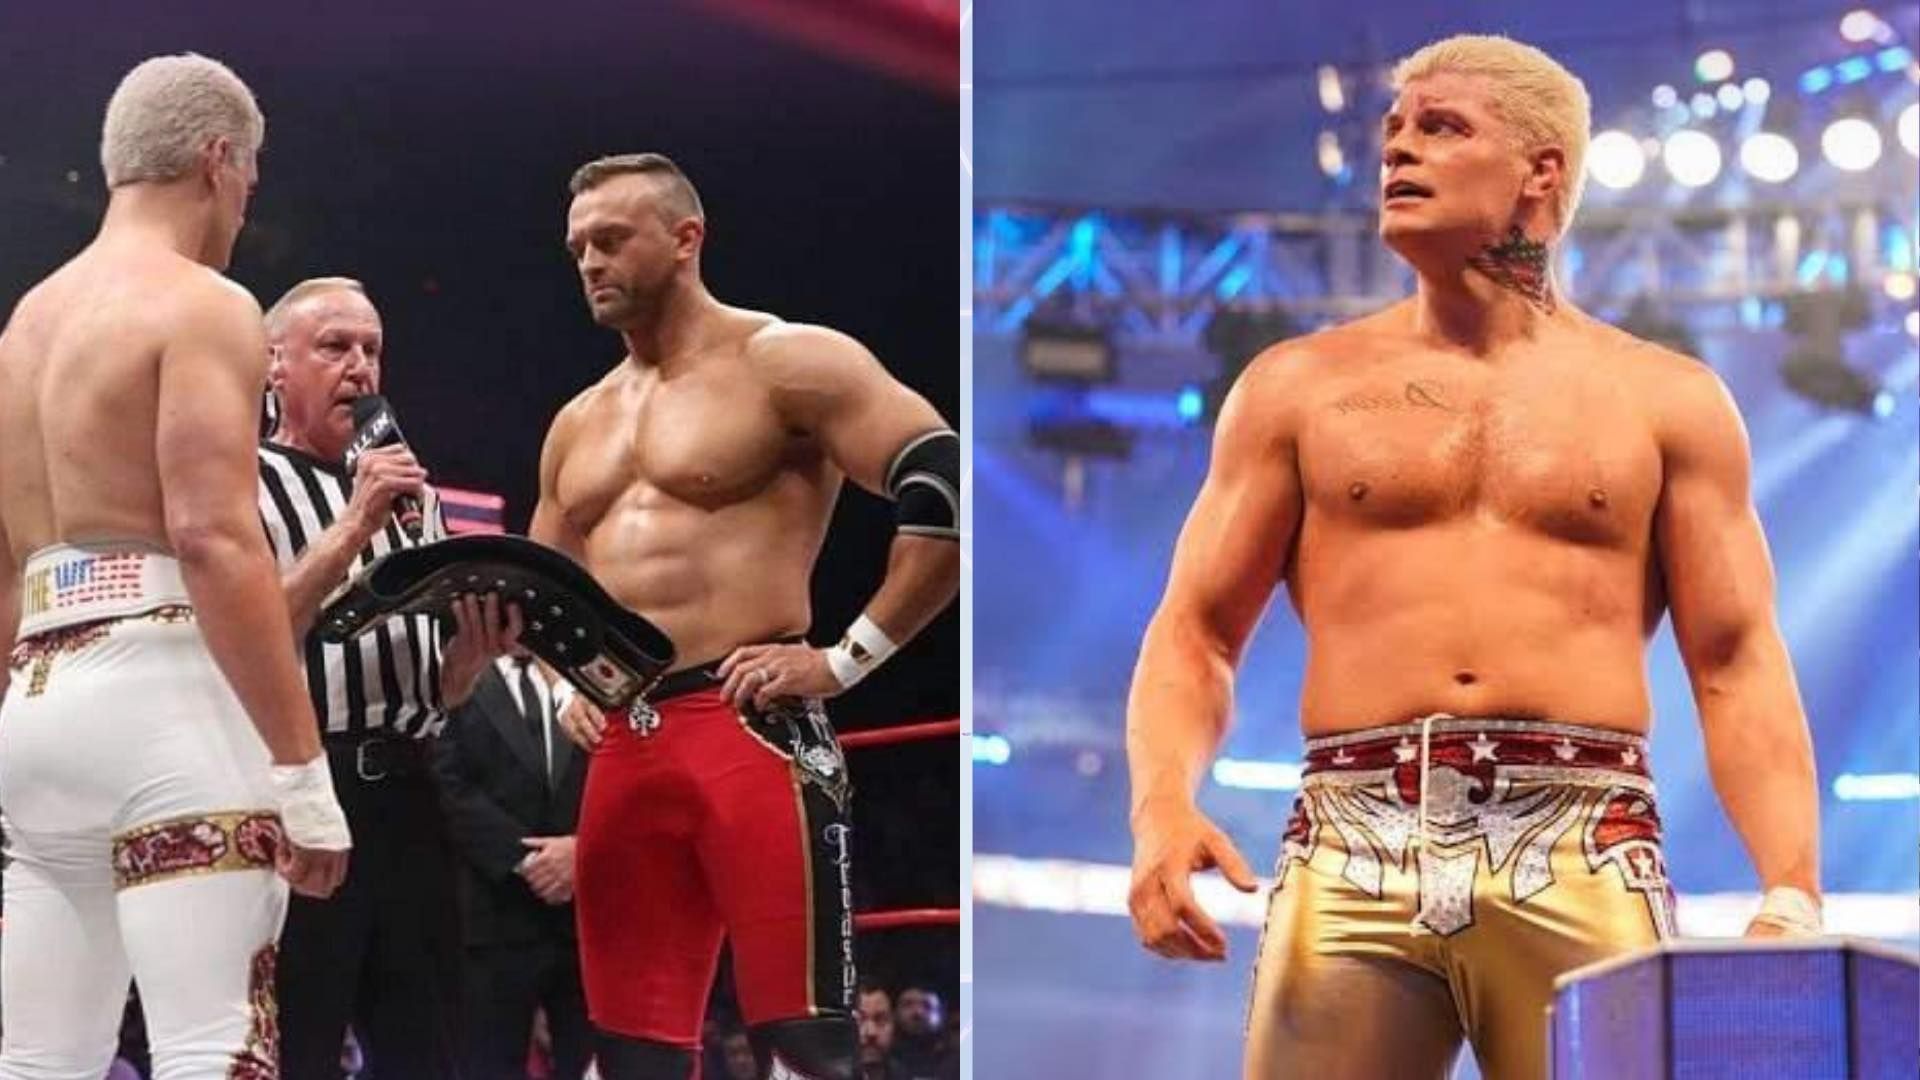 Nick Aldis is a free agent and could potentially join WWE